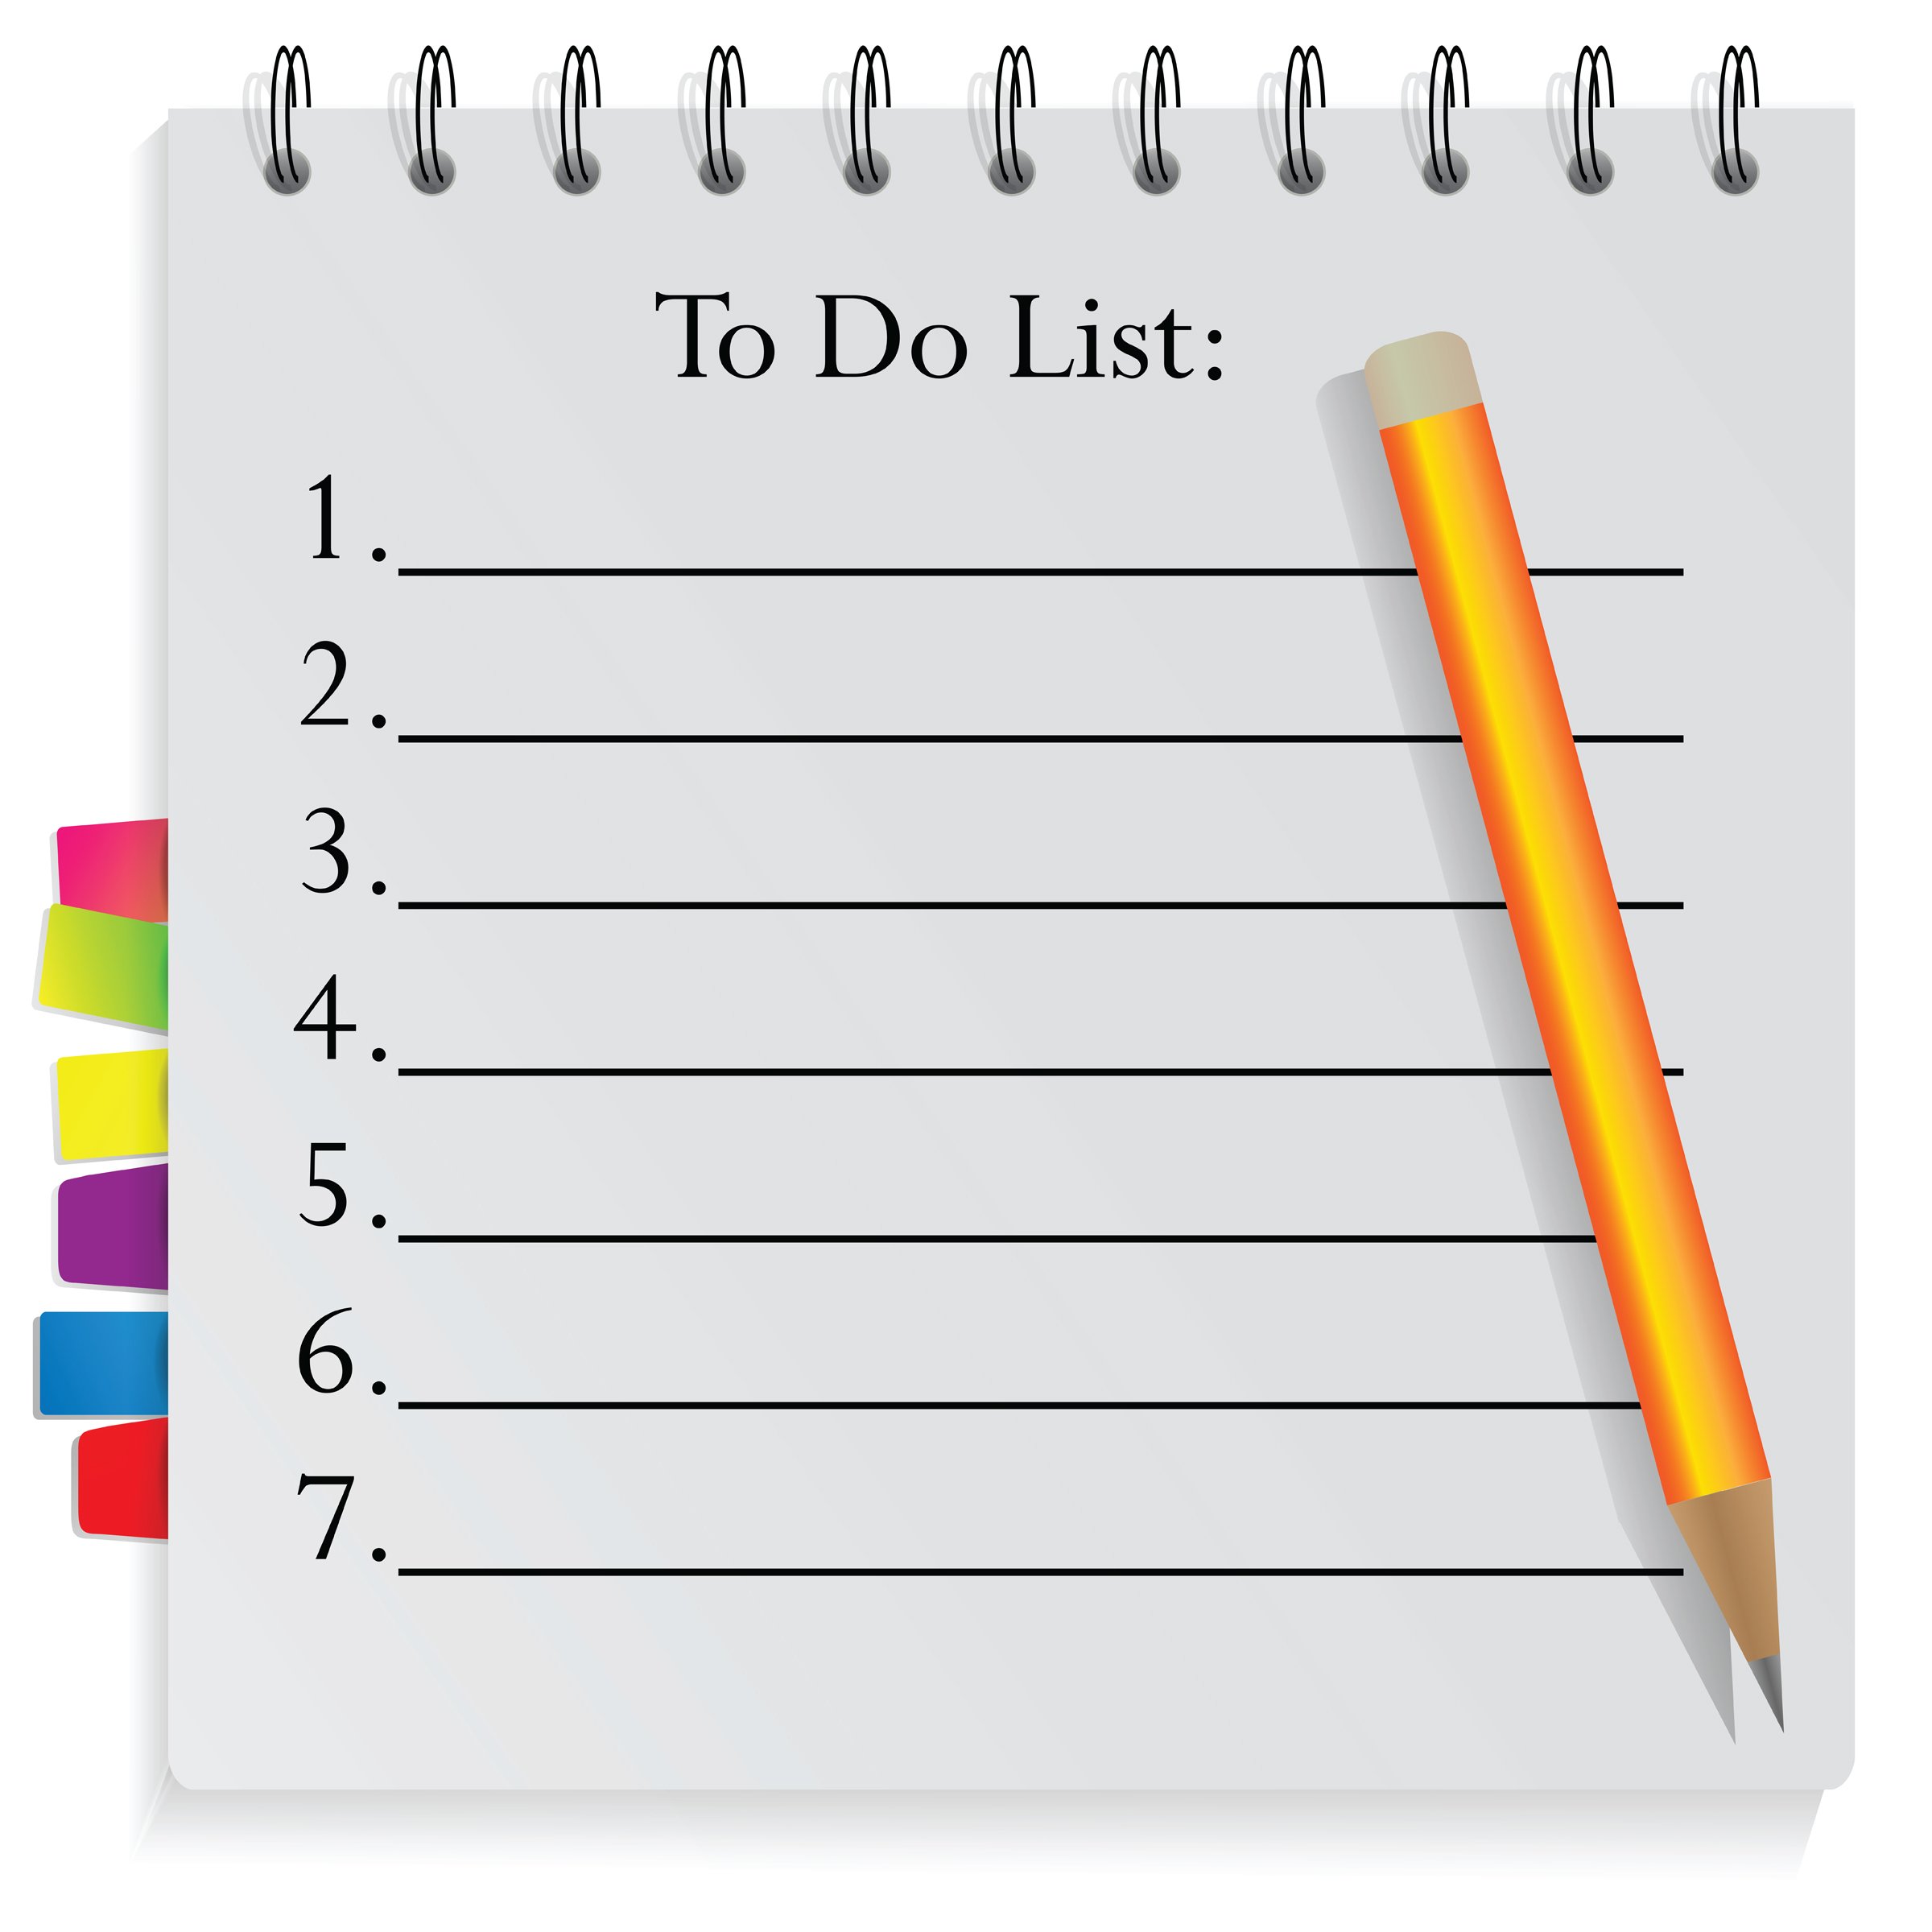 Computer generated image of a To Do List with pencil